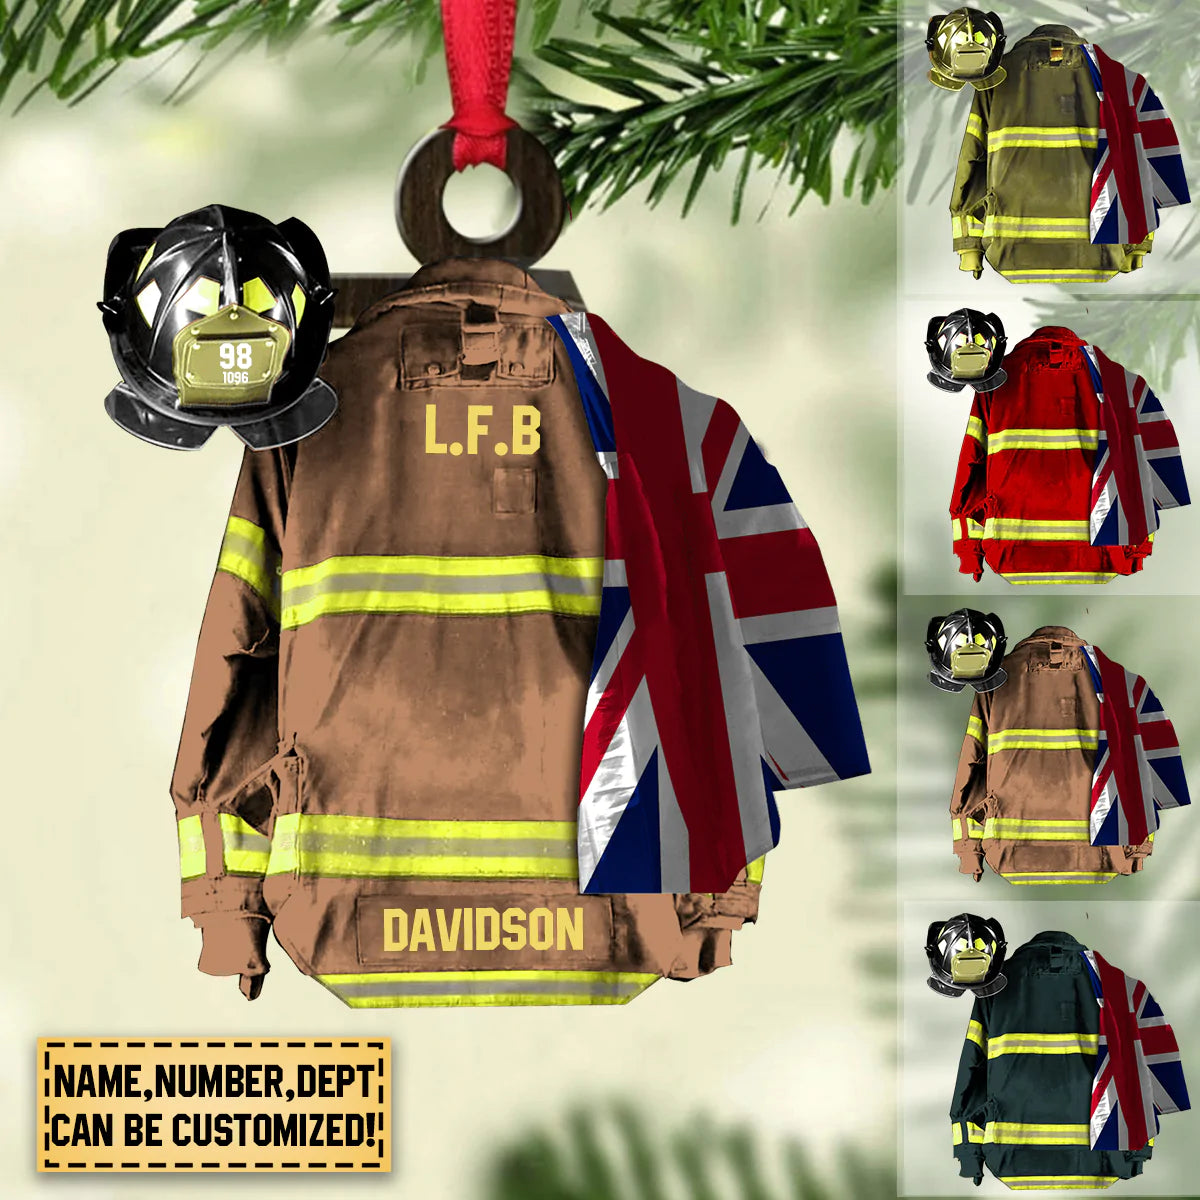 PERSONALIZED BRITISH FIRE DEPARTMENT HANGING ORNAMENT